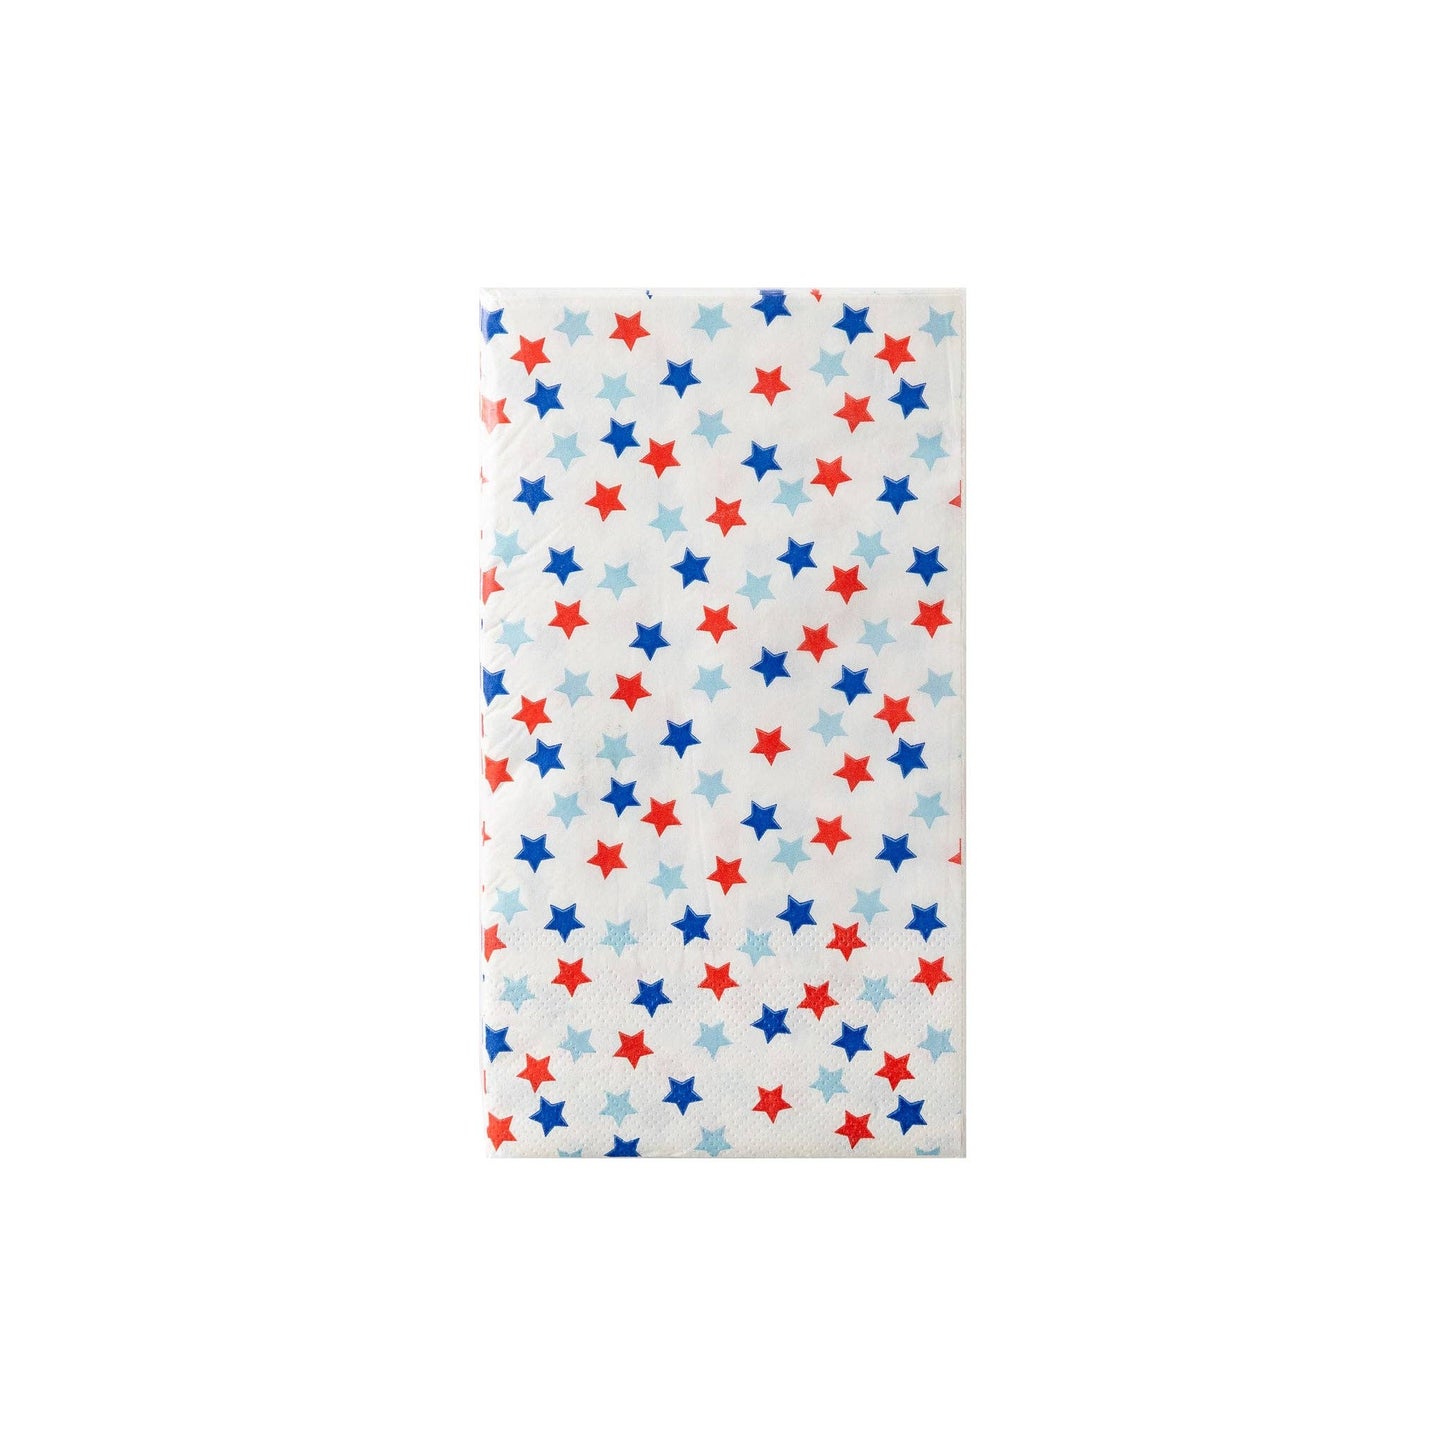 Scattered Stars Paper Guest Towel Napkin (24 Count)